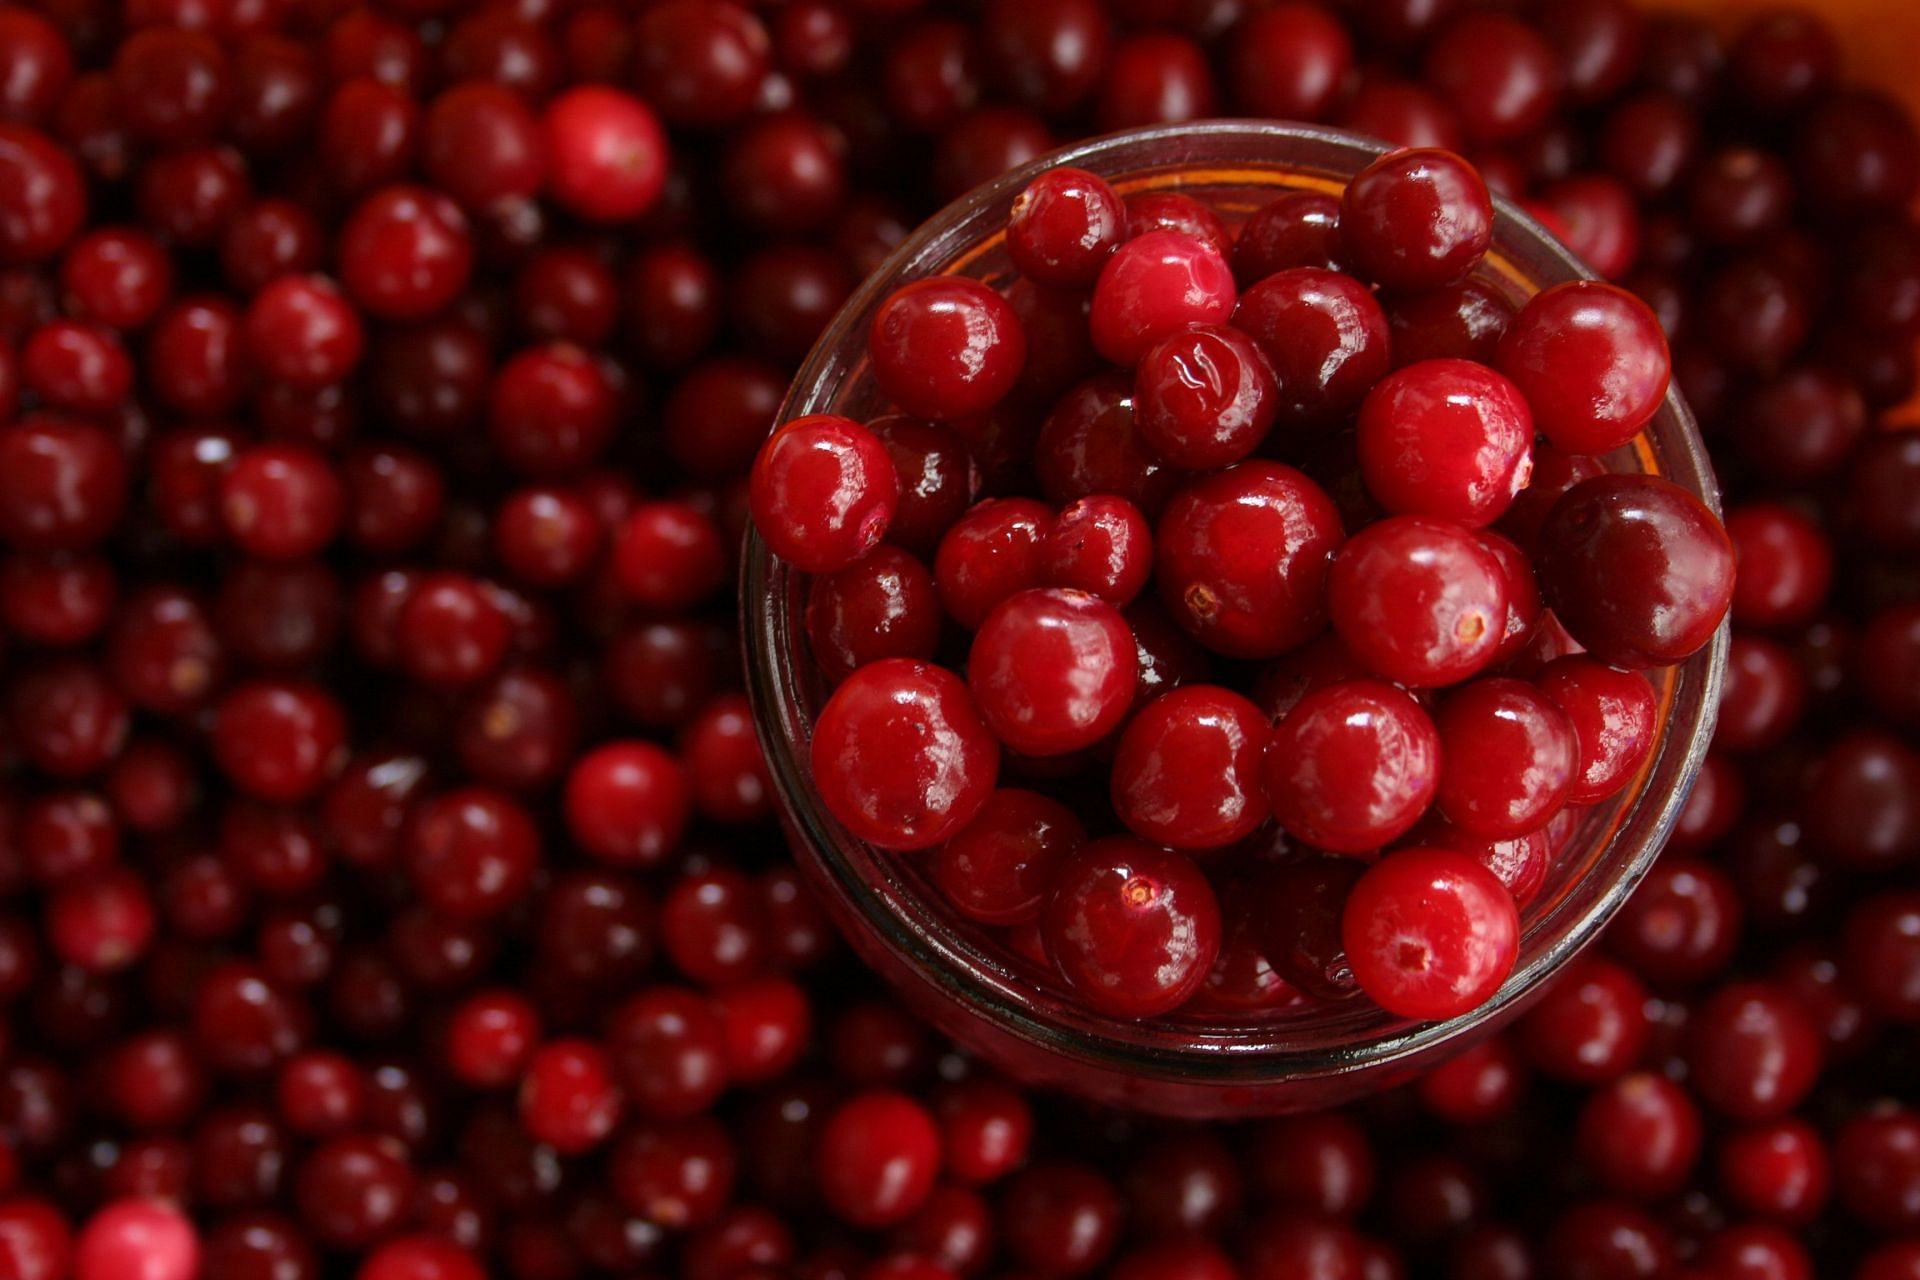 Cranberries to avoid water weight (image sourced via Pexels / Photo by Irita)